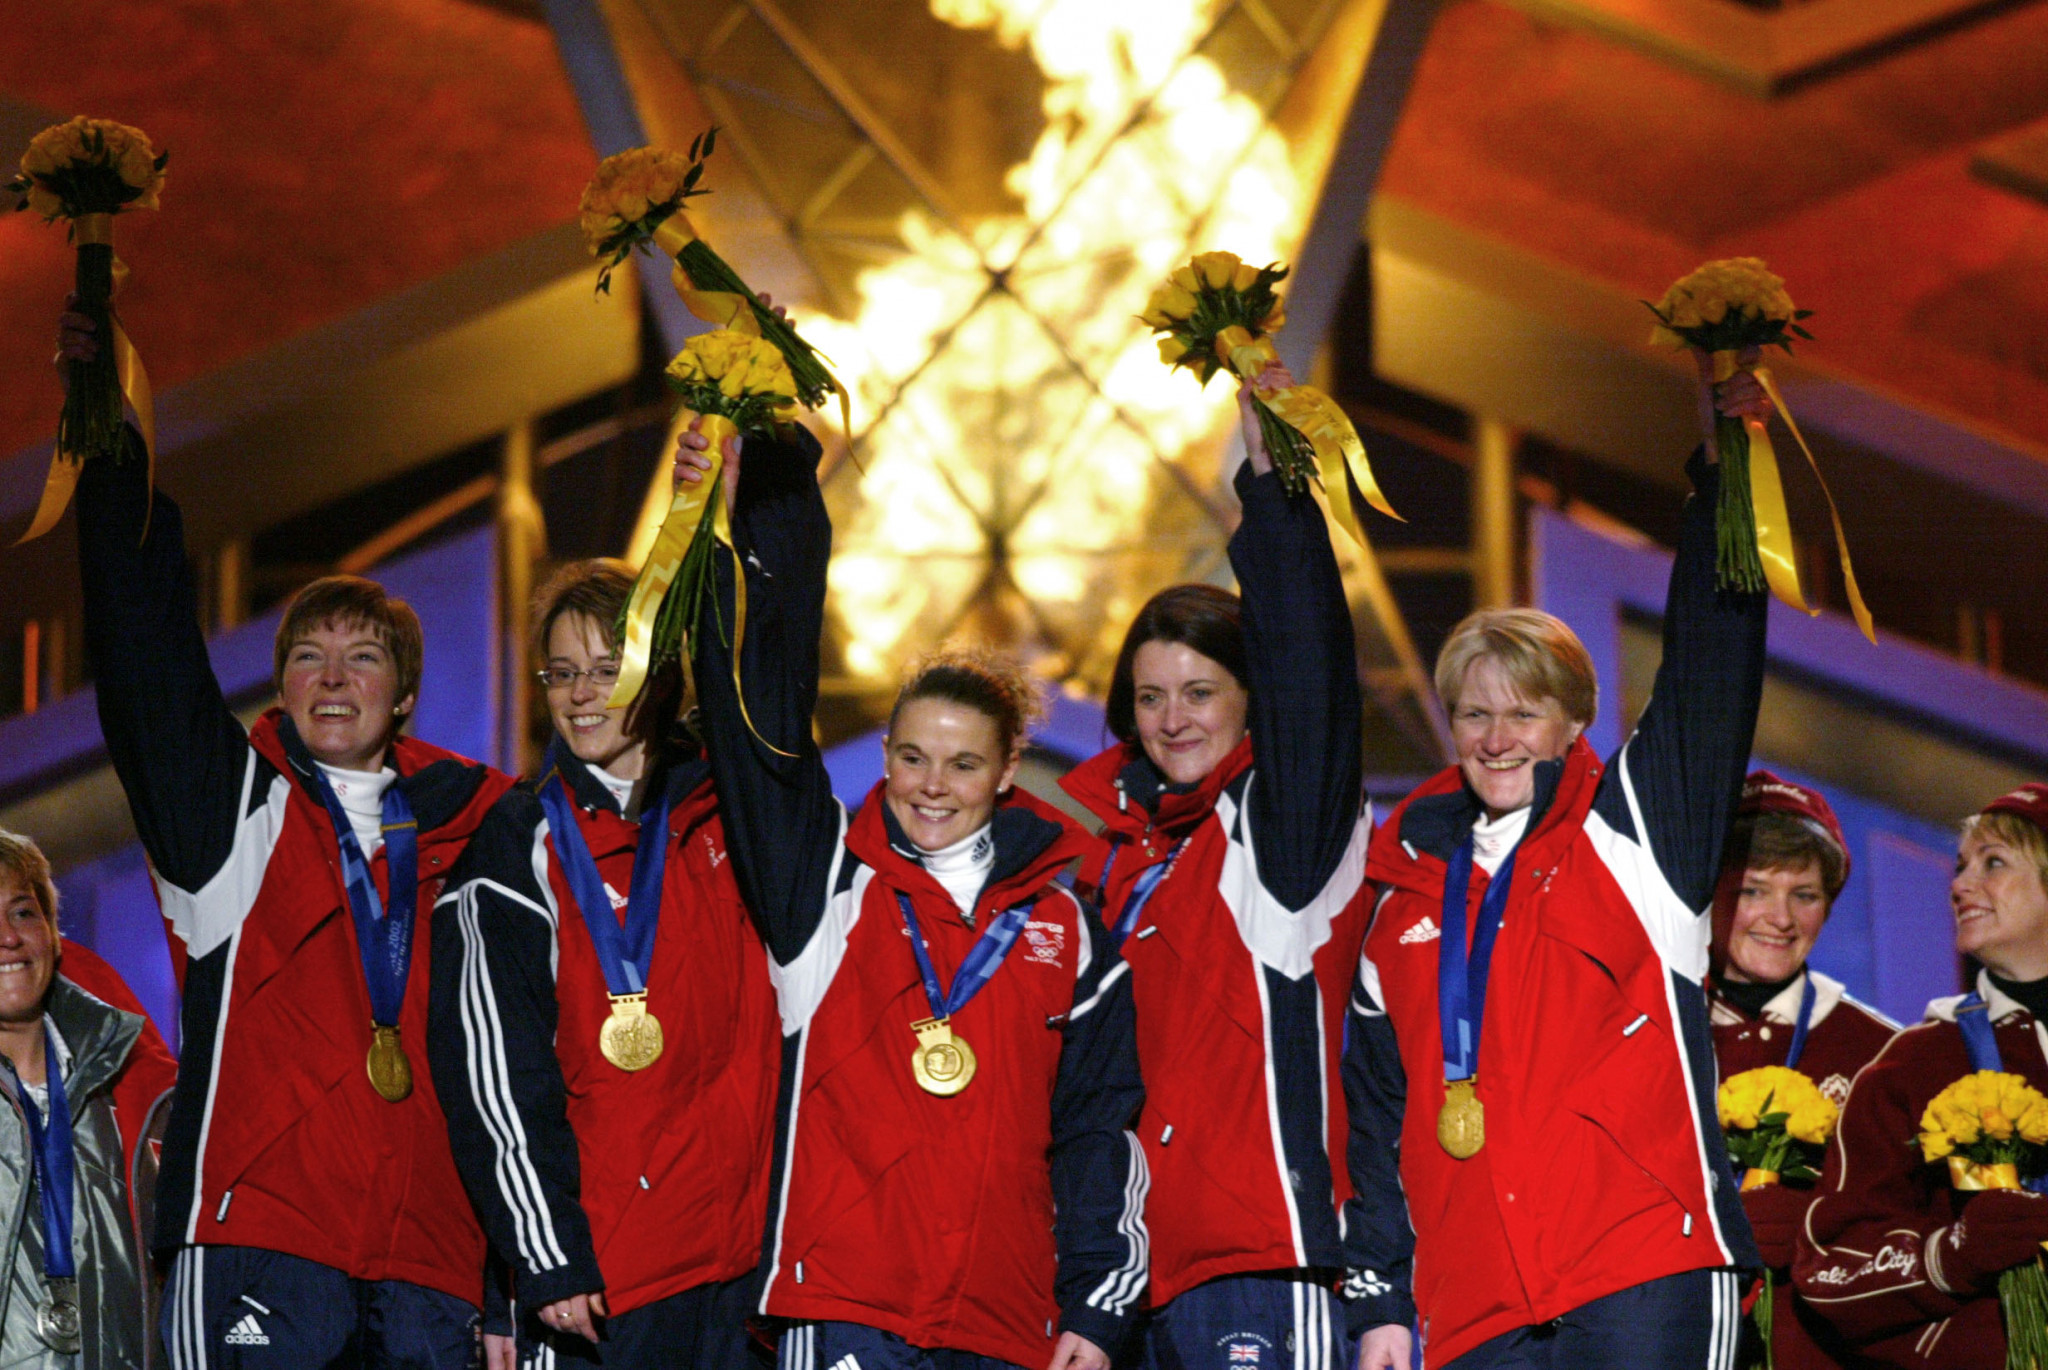 Rhona Martin, far right, has given up hope of seeing her Olympic gold medal from Salt Lake City 2002 again after it was stolen in 2014 ©Getty Images